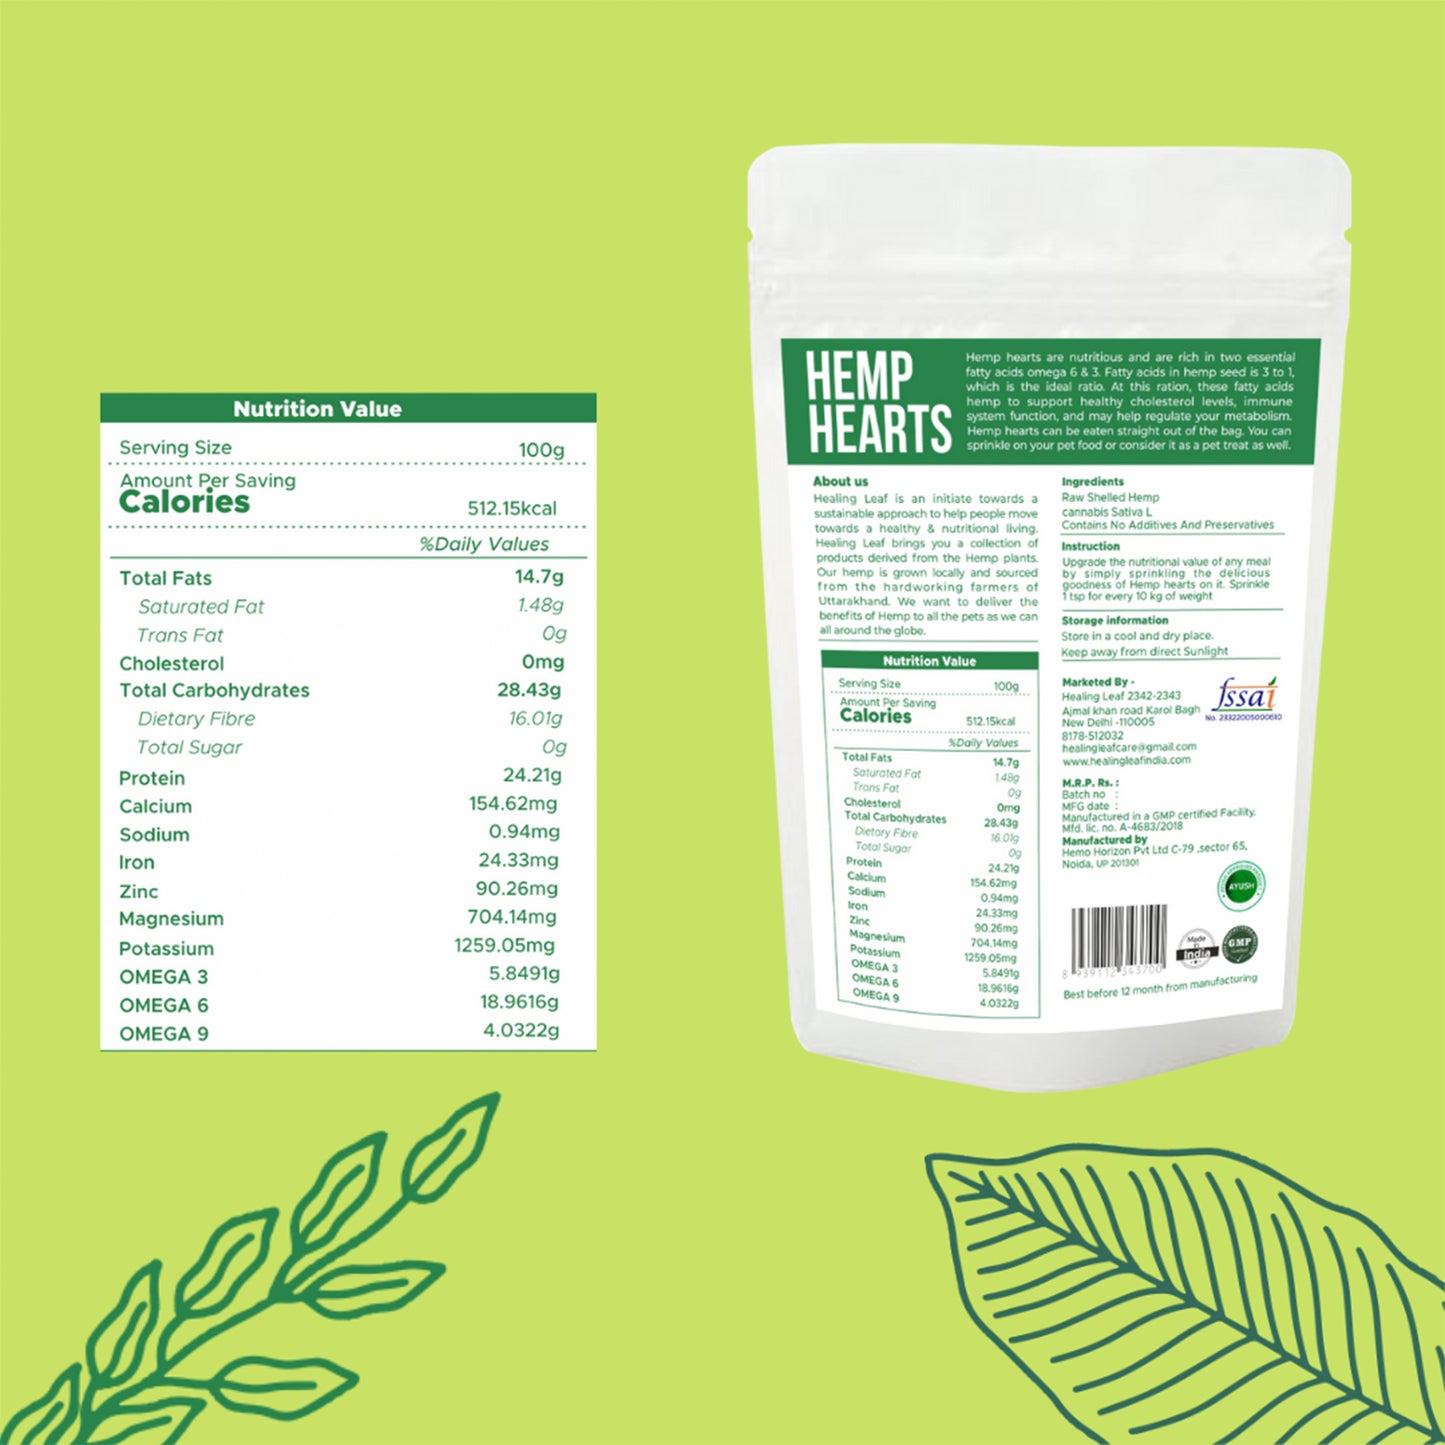 Healing Leaf - Hemp Hearts For Dogs & Cats